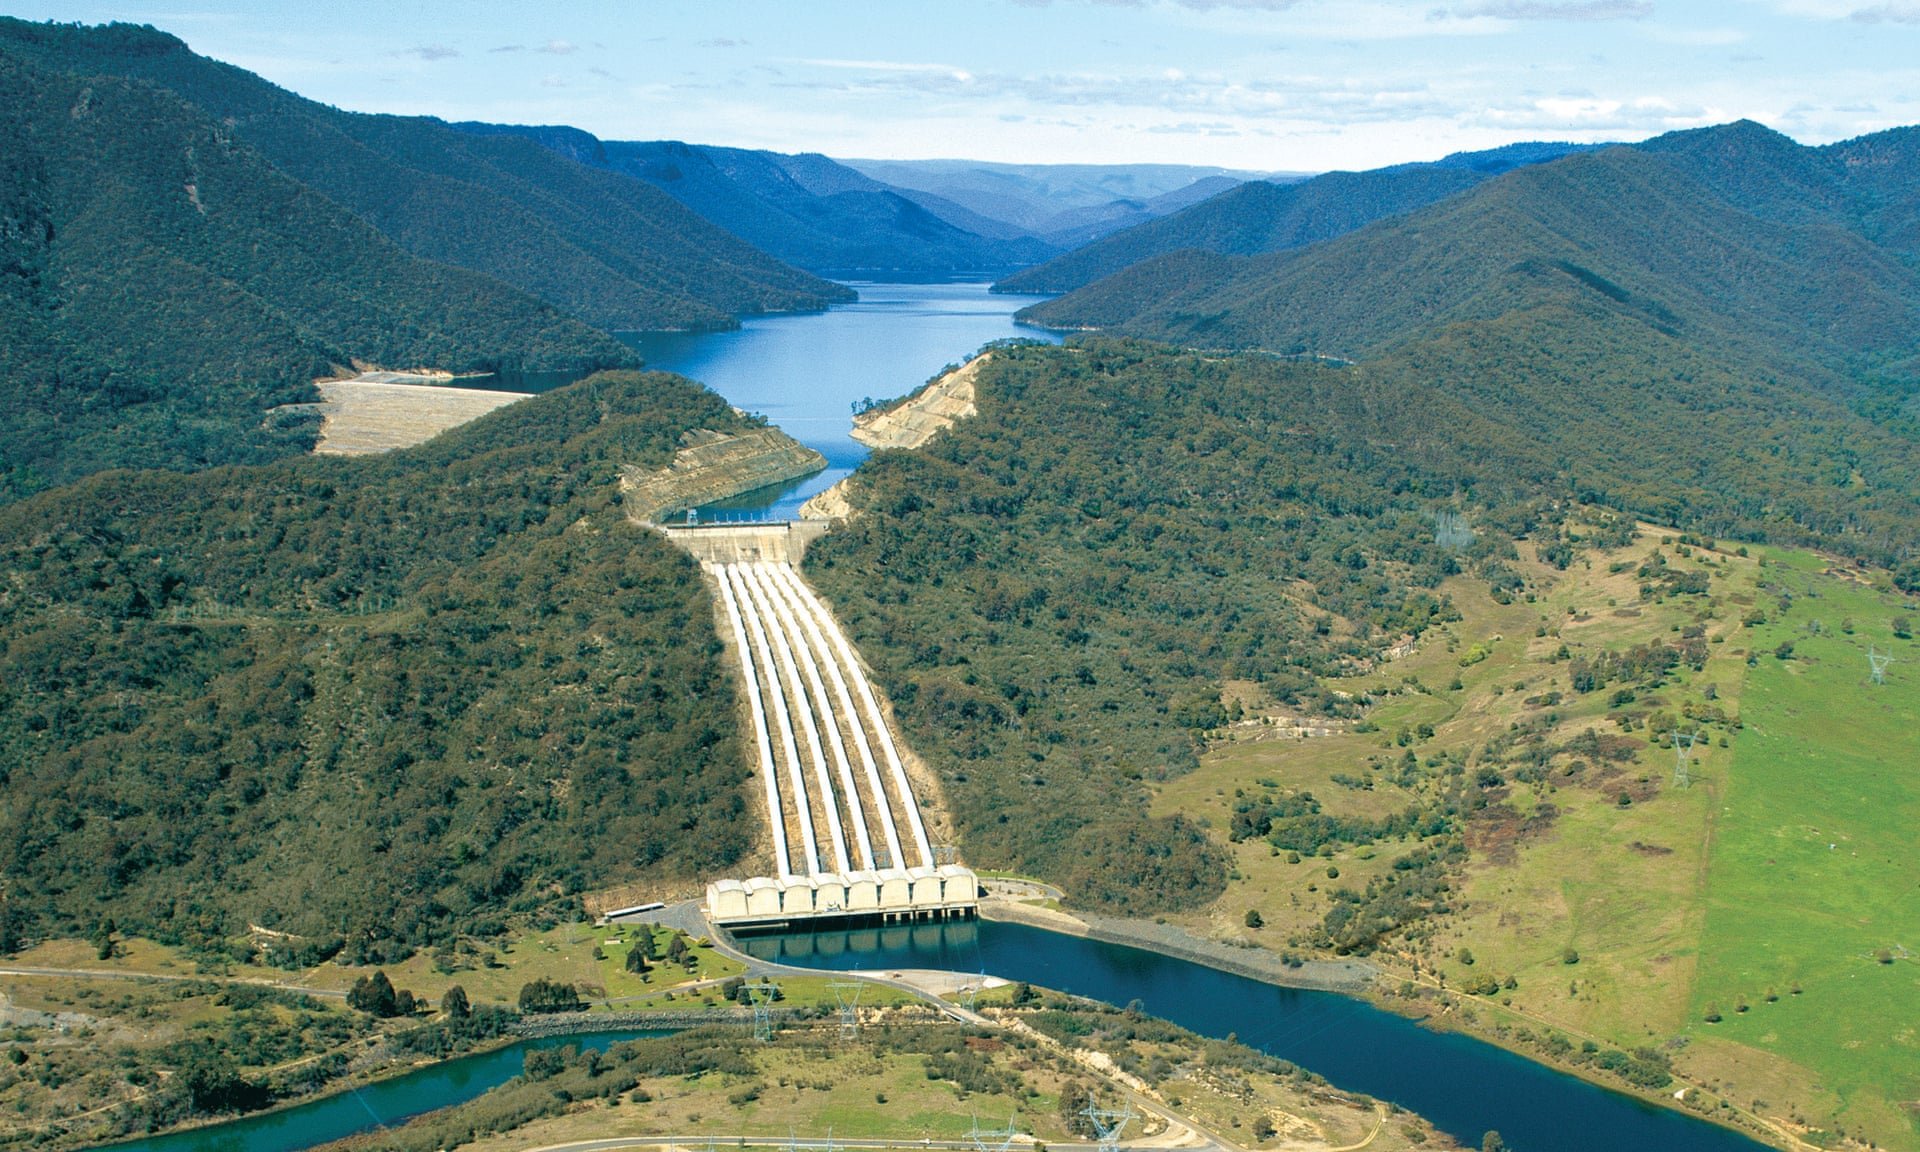 Photograph: Snowy Hydro Limited/AAP